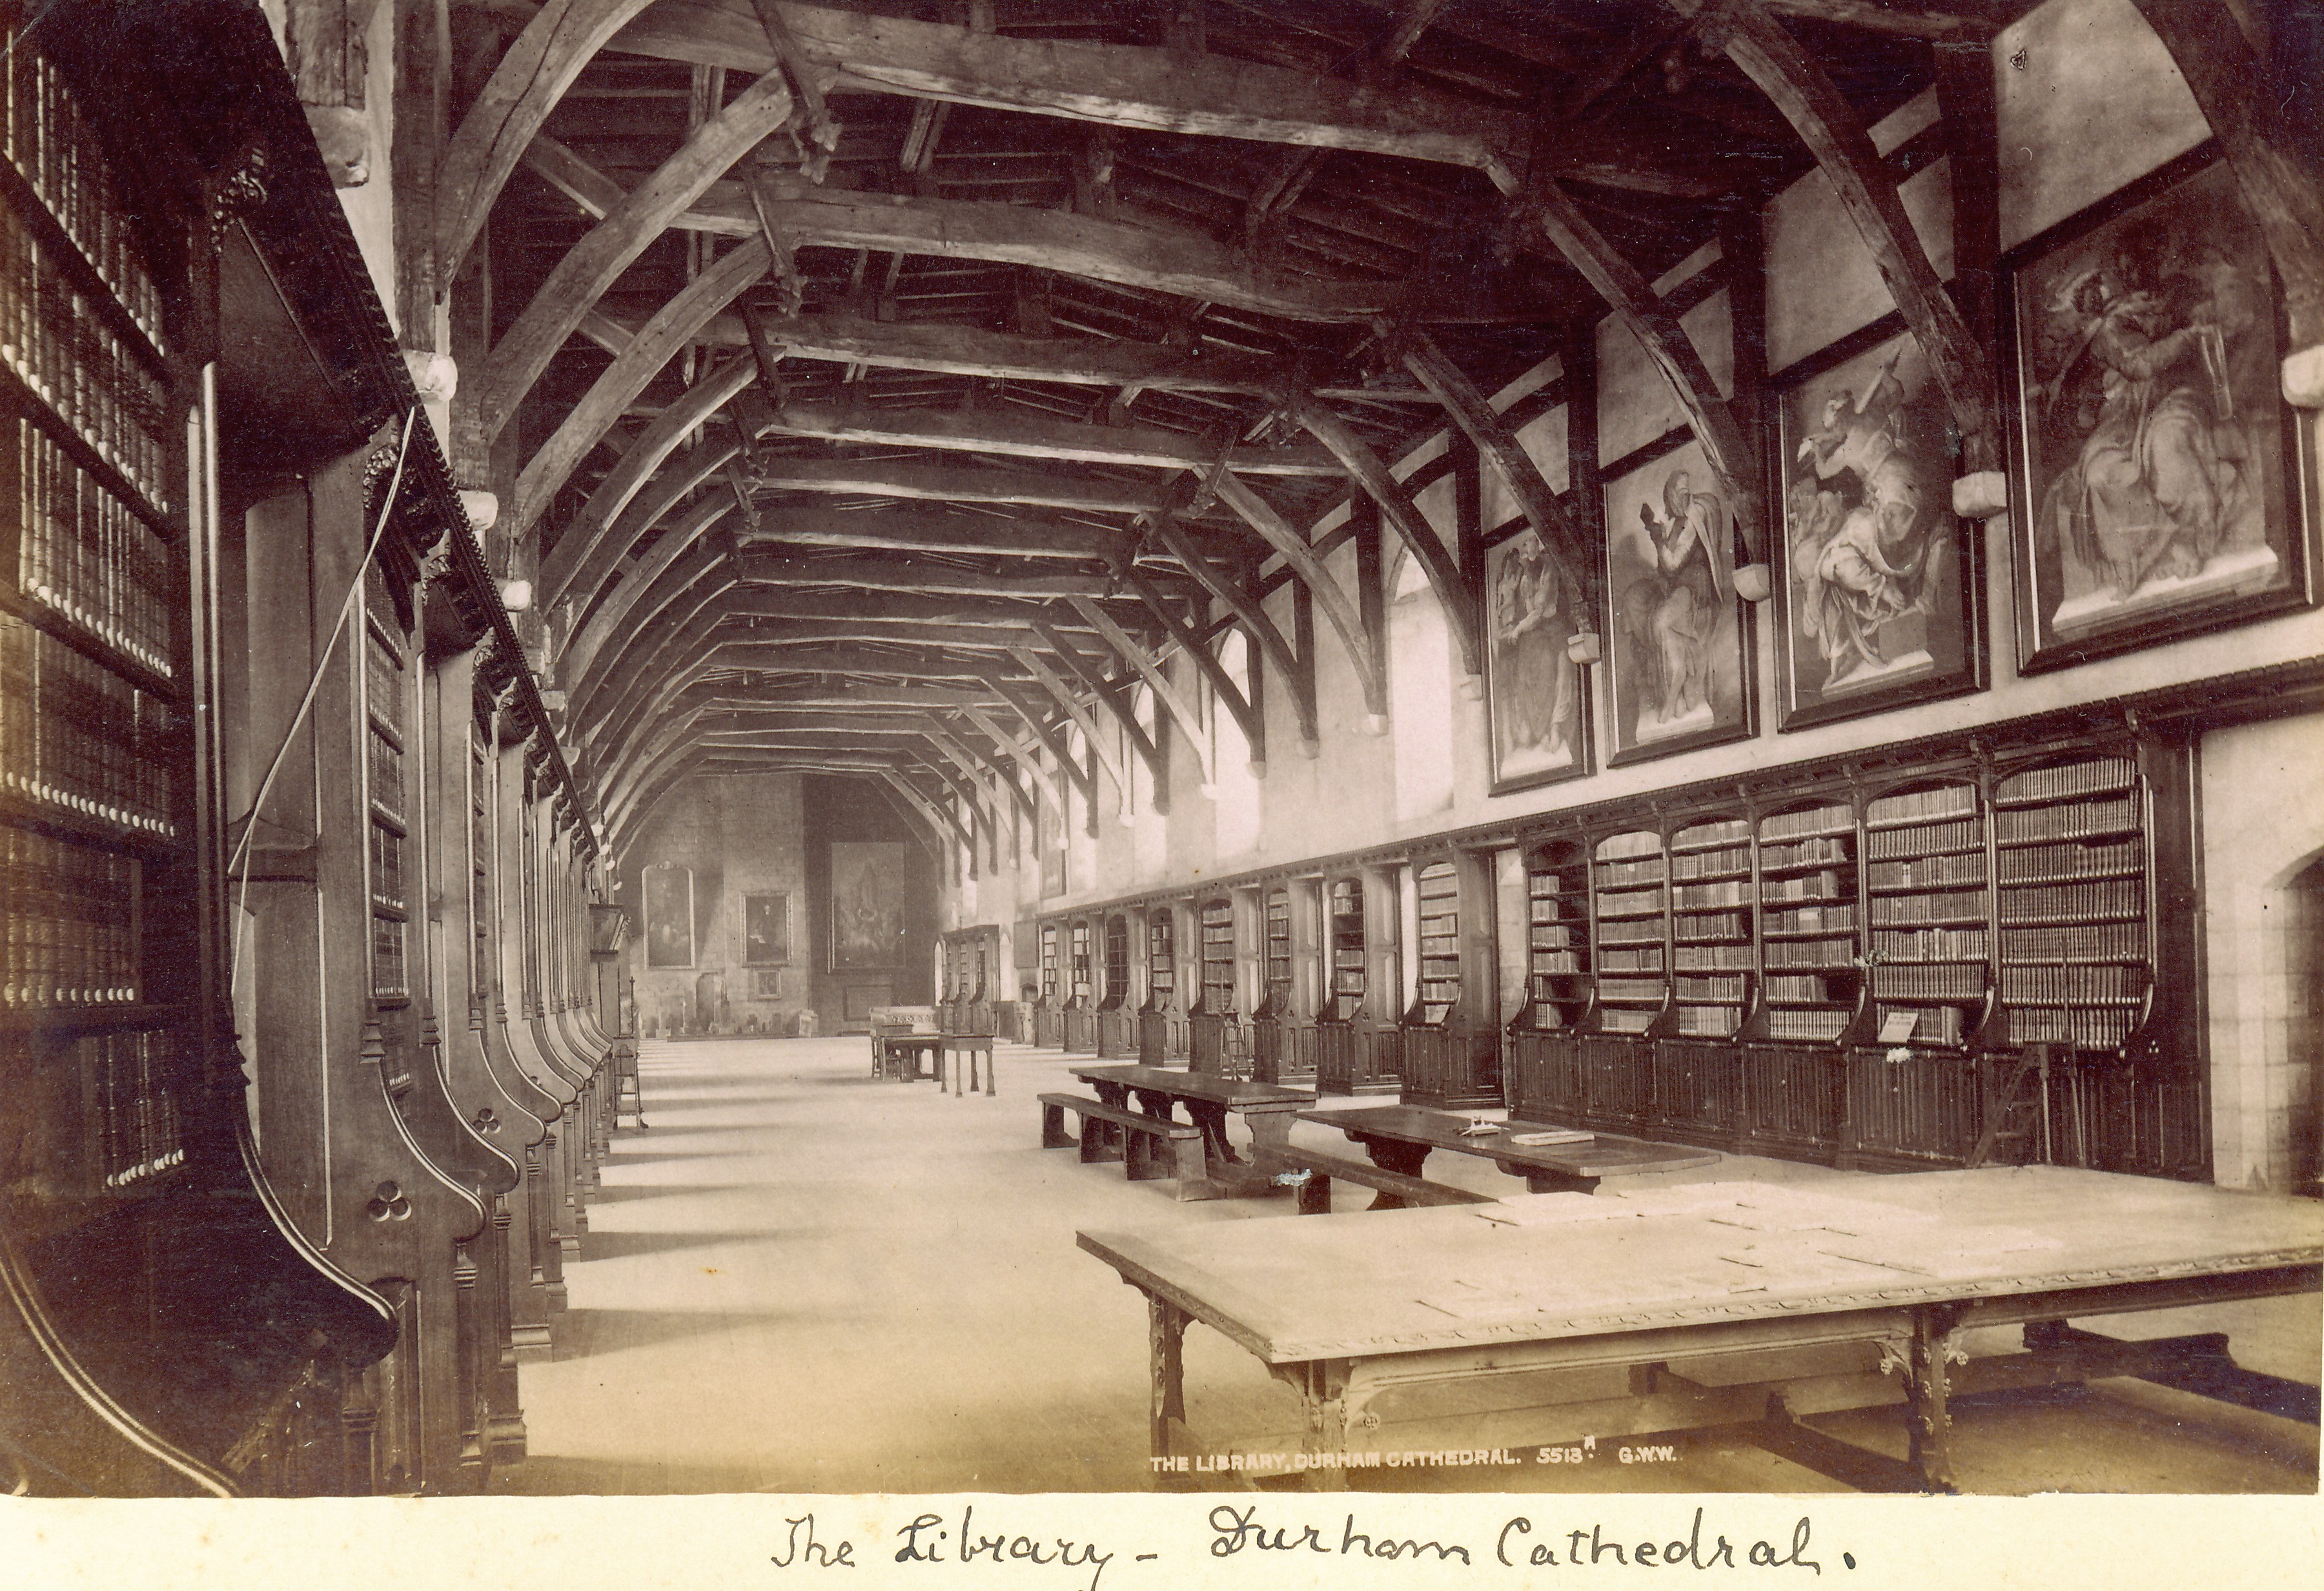 Photograph: Interior view of the Library